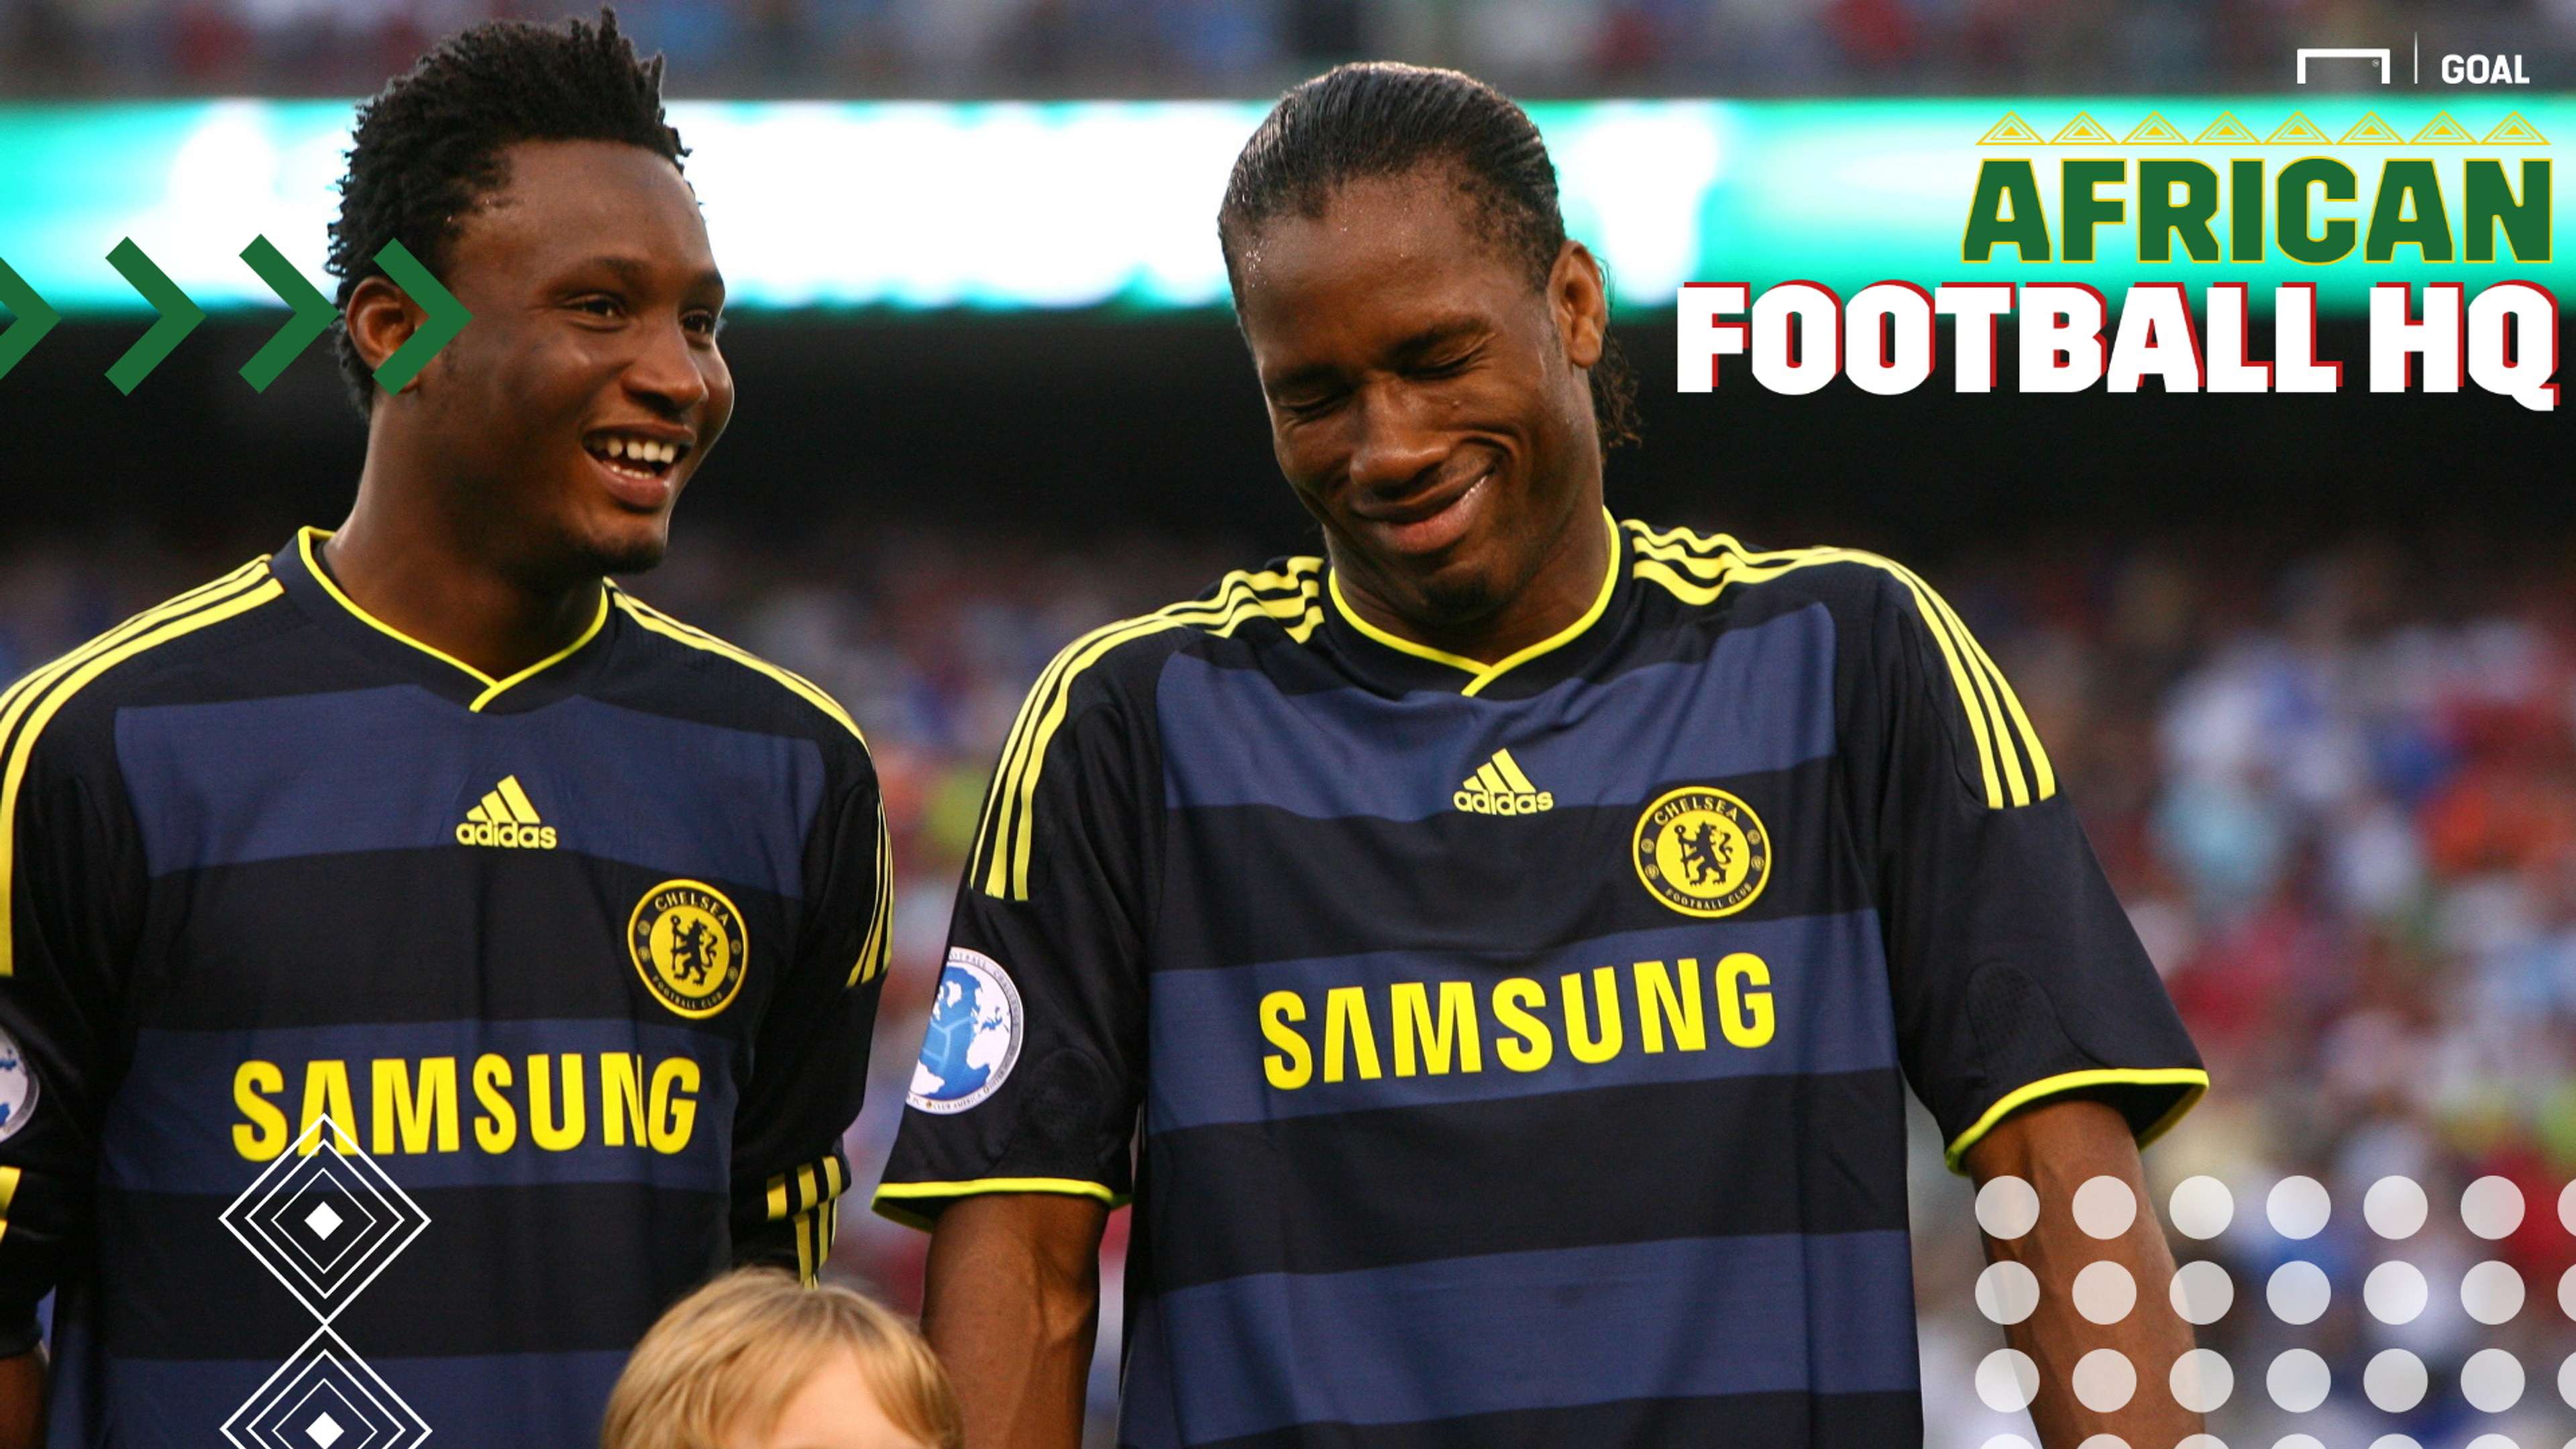 AFHQ Mikel Drogba